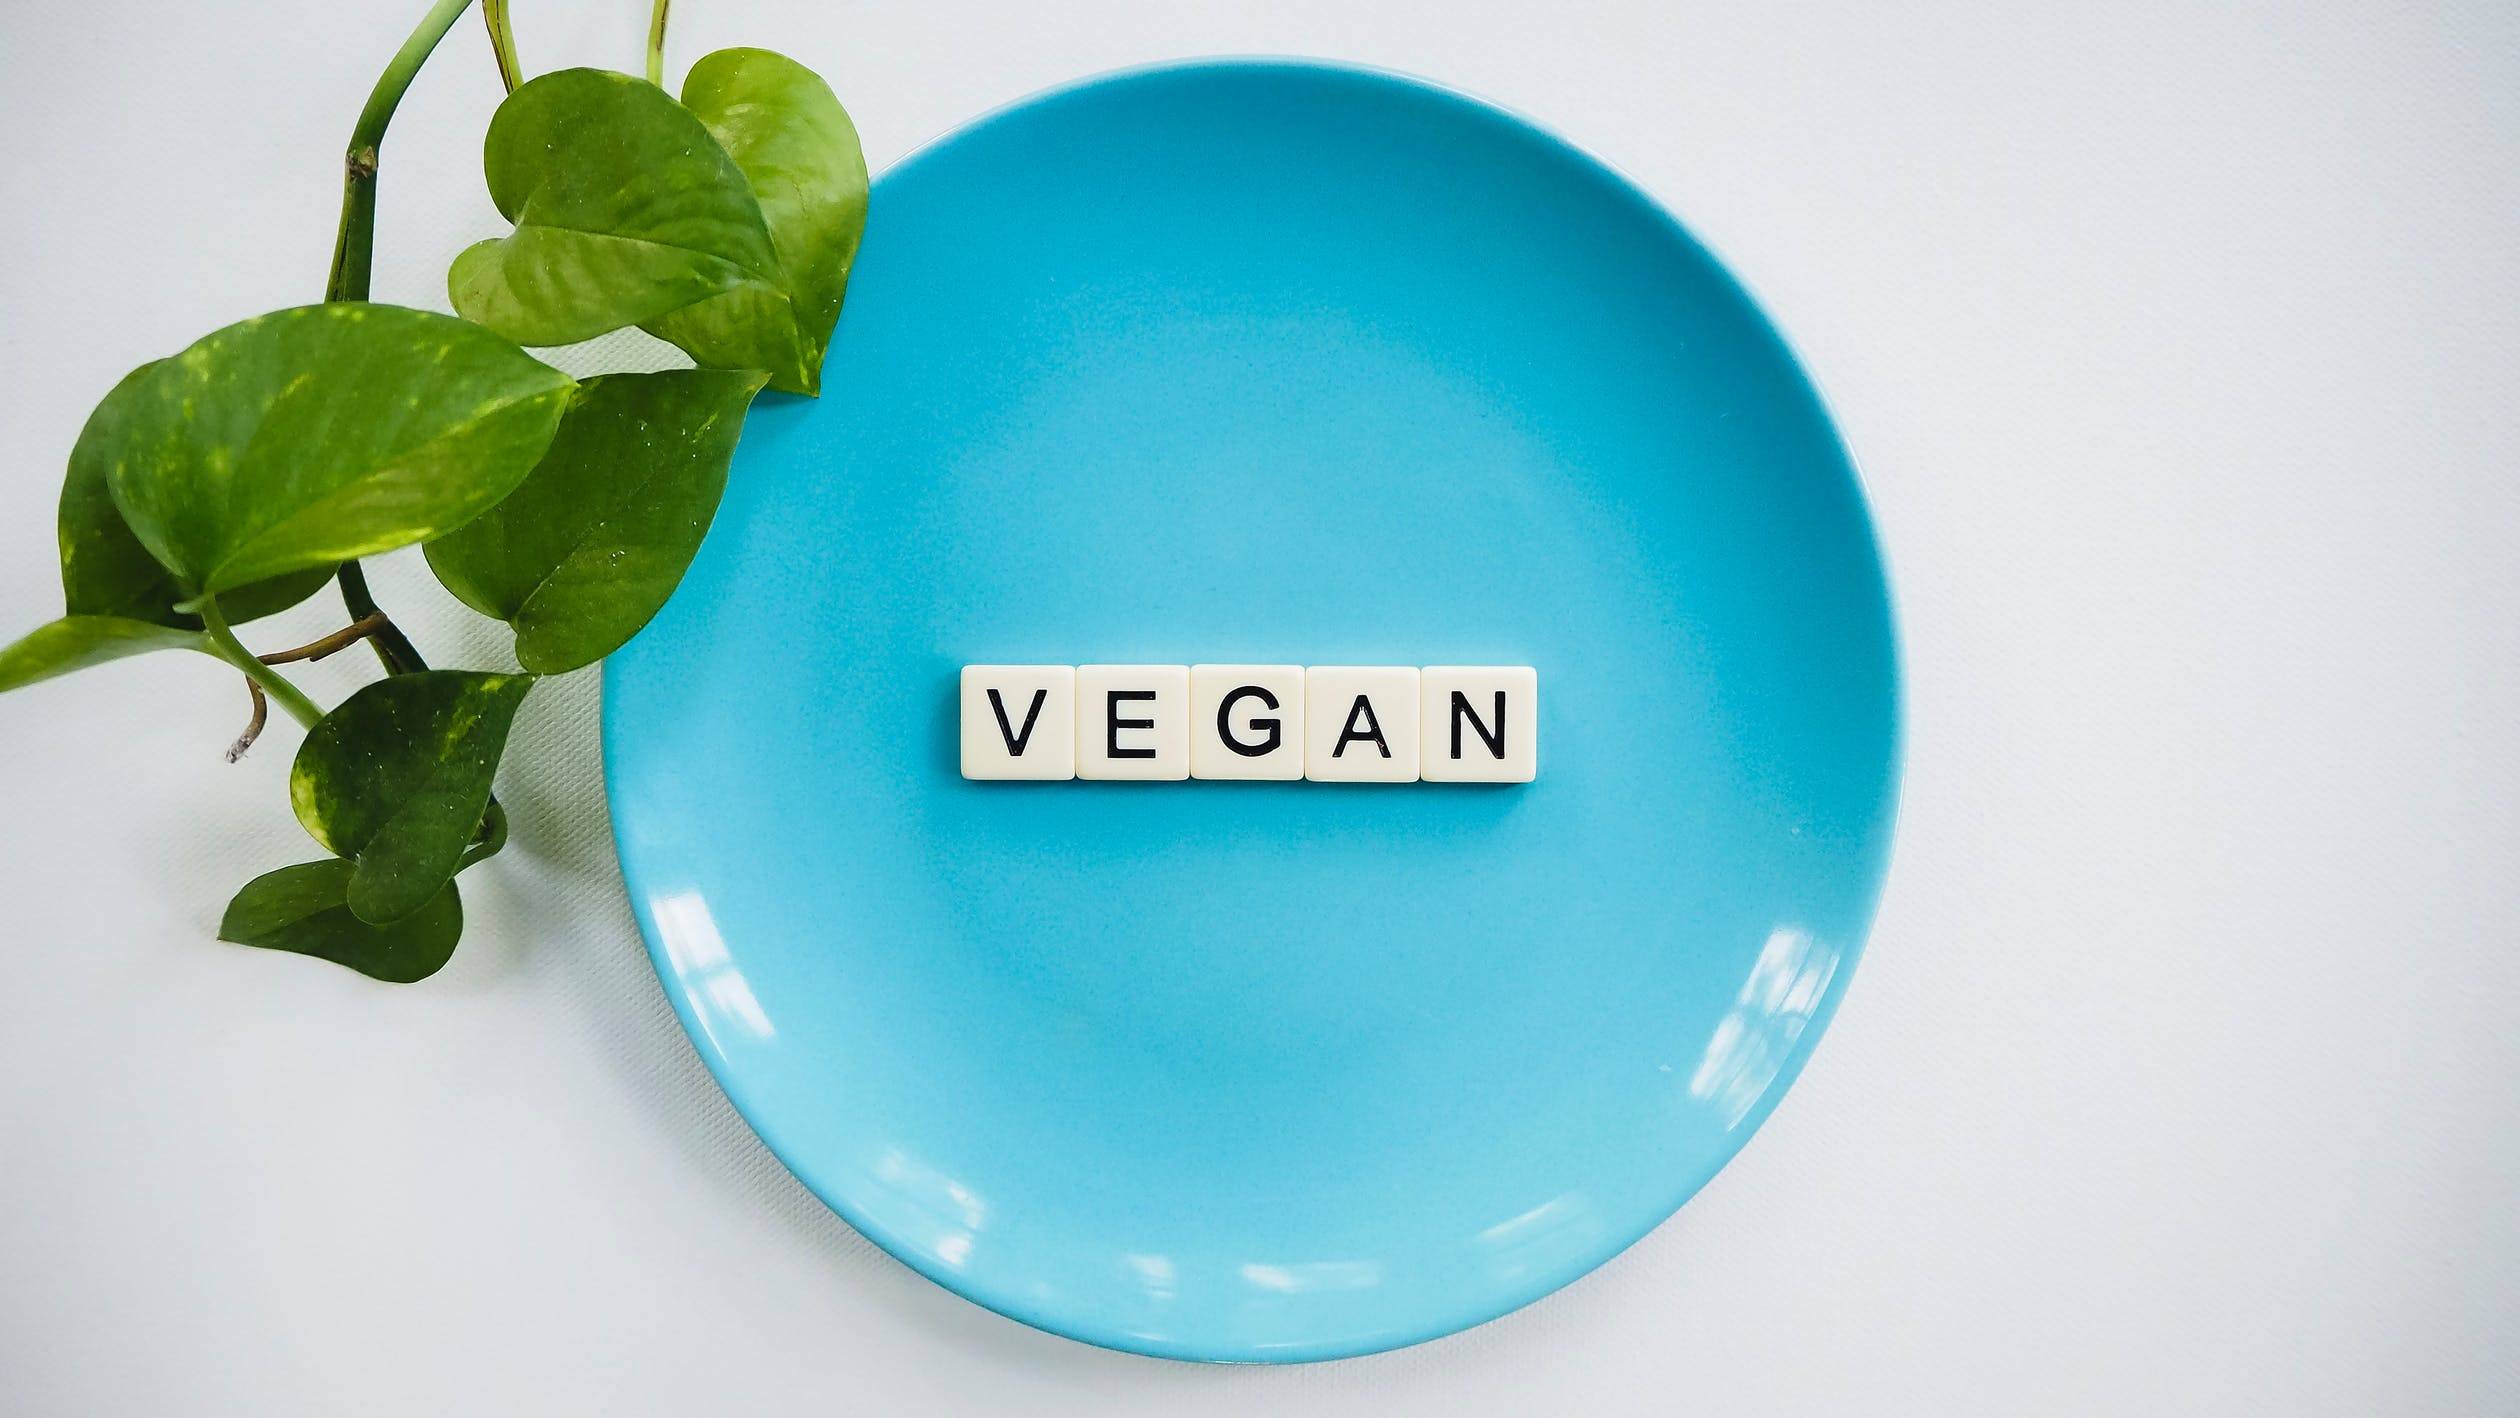 Vegan Letters On A Plate